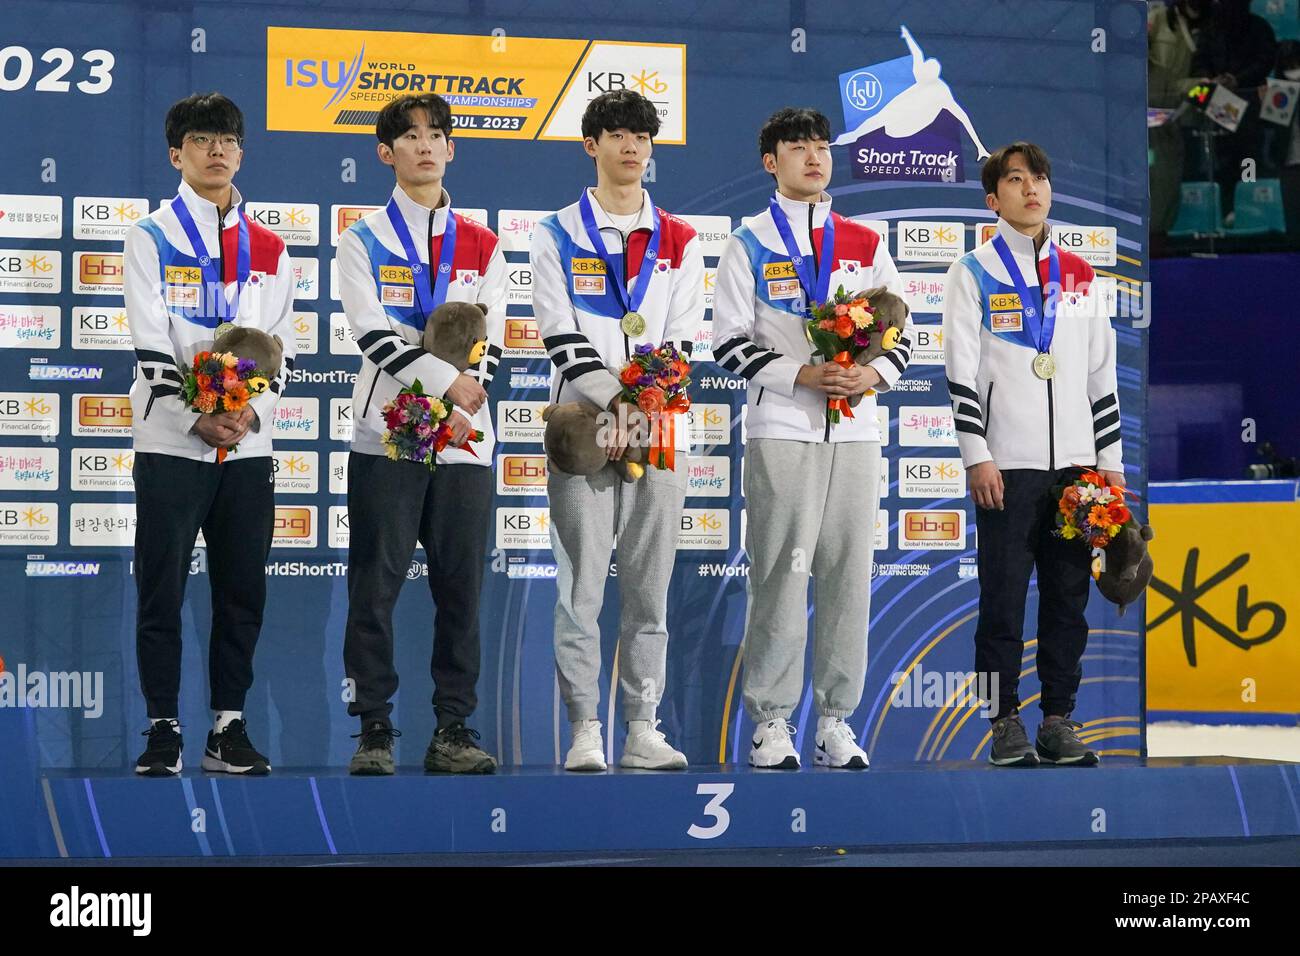 SEOUL, KOREA - MARCH 12: Kyung Hwan Hong of Korea, June Seo Lee of Korea, Yong Jin Lim of Korea and Ji Won Park of Korea during the podium ceremony after competing on the Men's Relay during the ISU World Short Track Speed Skating Championships at Mokdong Ice Rink on March 12, 2023 in Seoul, Korea (Photo by Andre Weening/Orange Pictures) Stock Photo